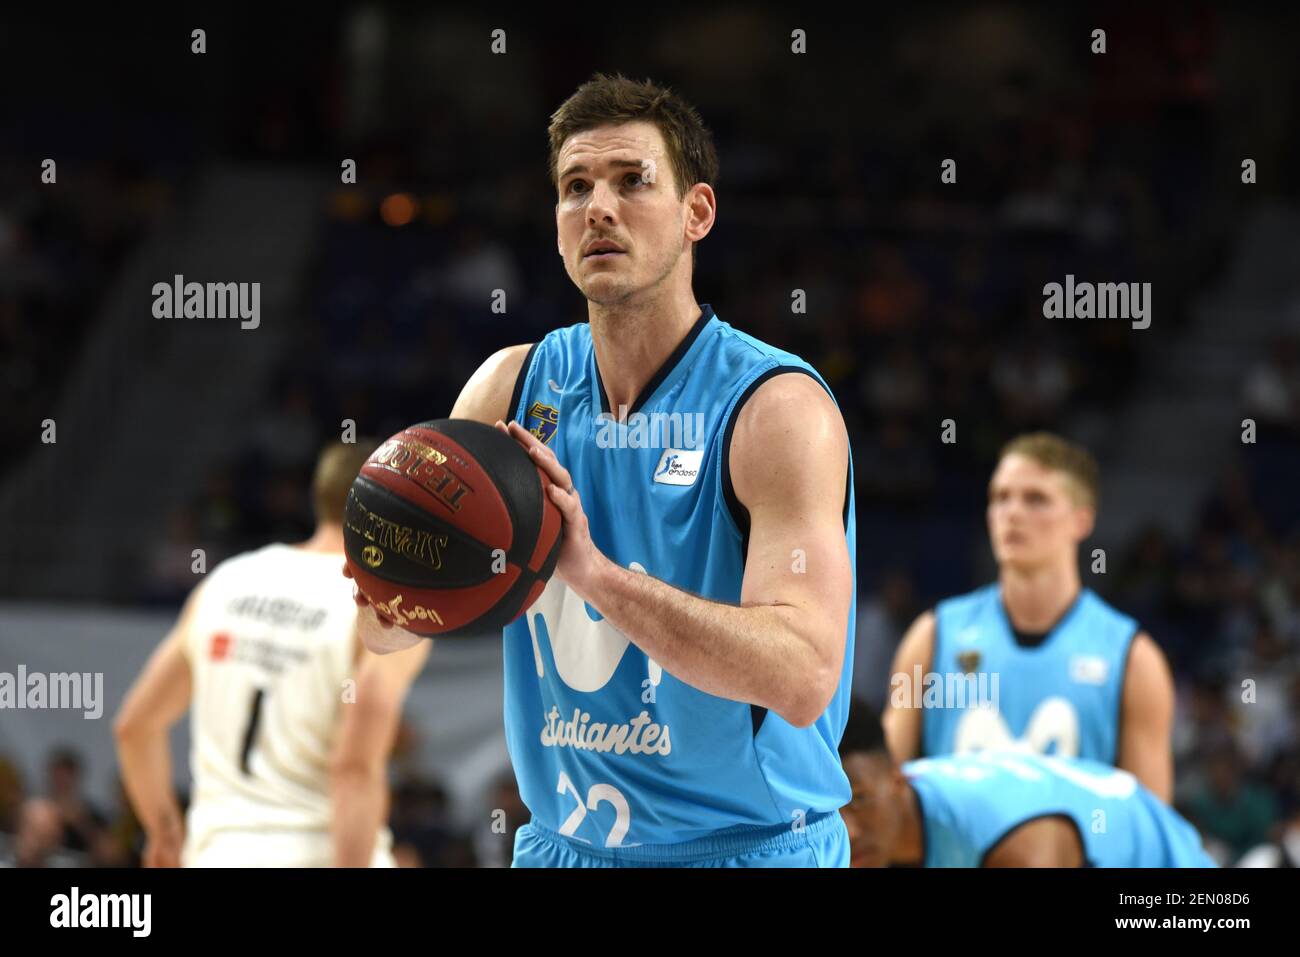 Nik Caner-Medley, #22 of Estudiantes seen in action during the 2018/2019  Liga Endesa Regular Season Game (day 31) between Real Madrid and Movistar  Estudiantes at WiZink center in Madrid. Final Score: Real